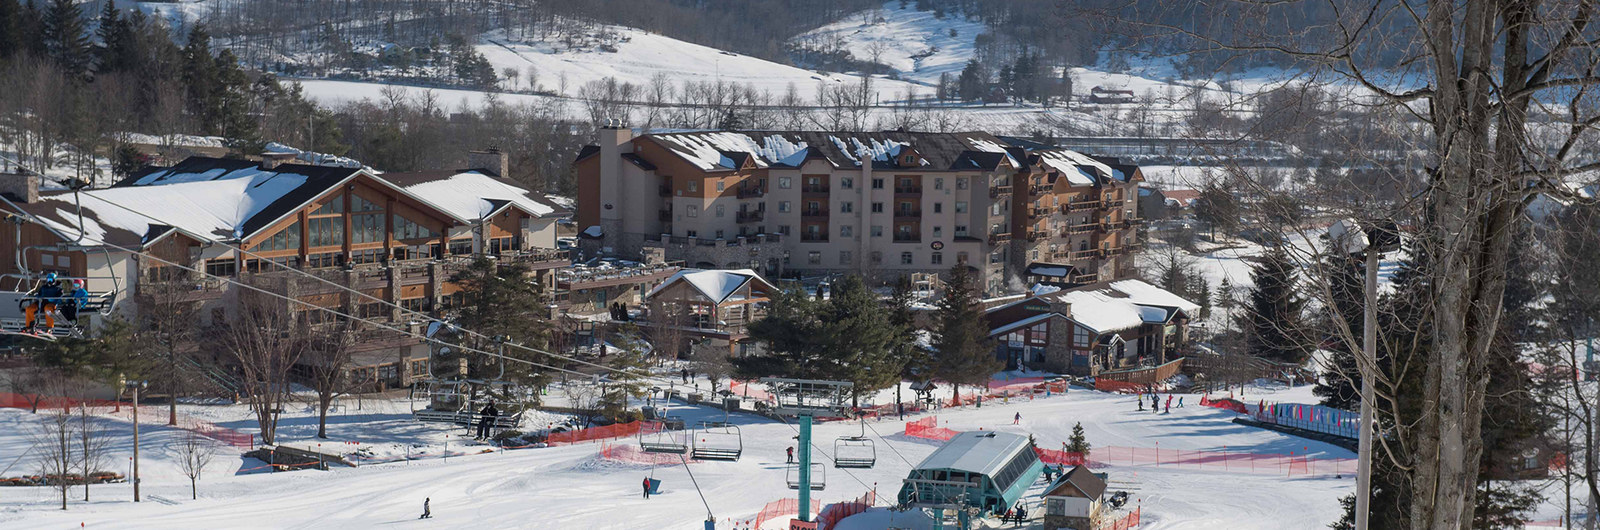 Hotel at base of Holiday Valley ski mountain in Ellicottiville New York